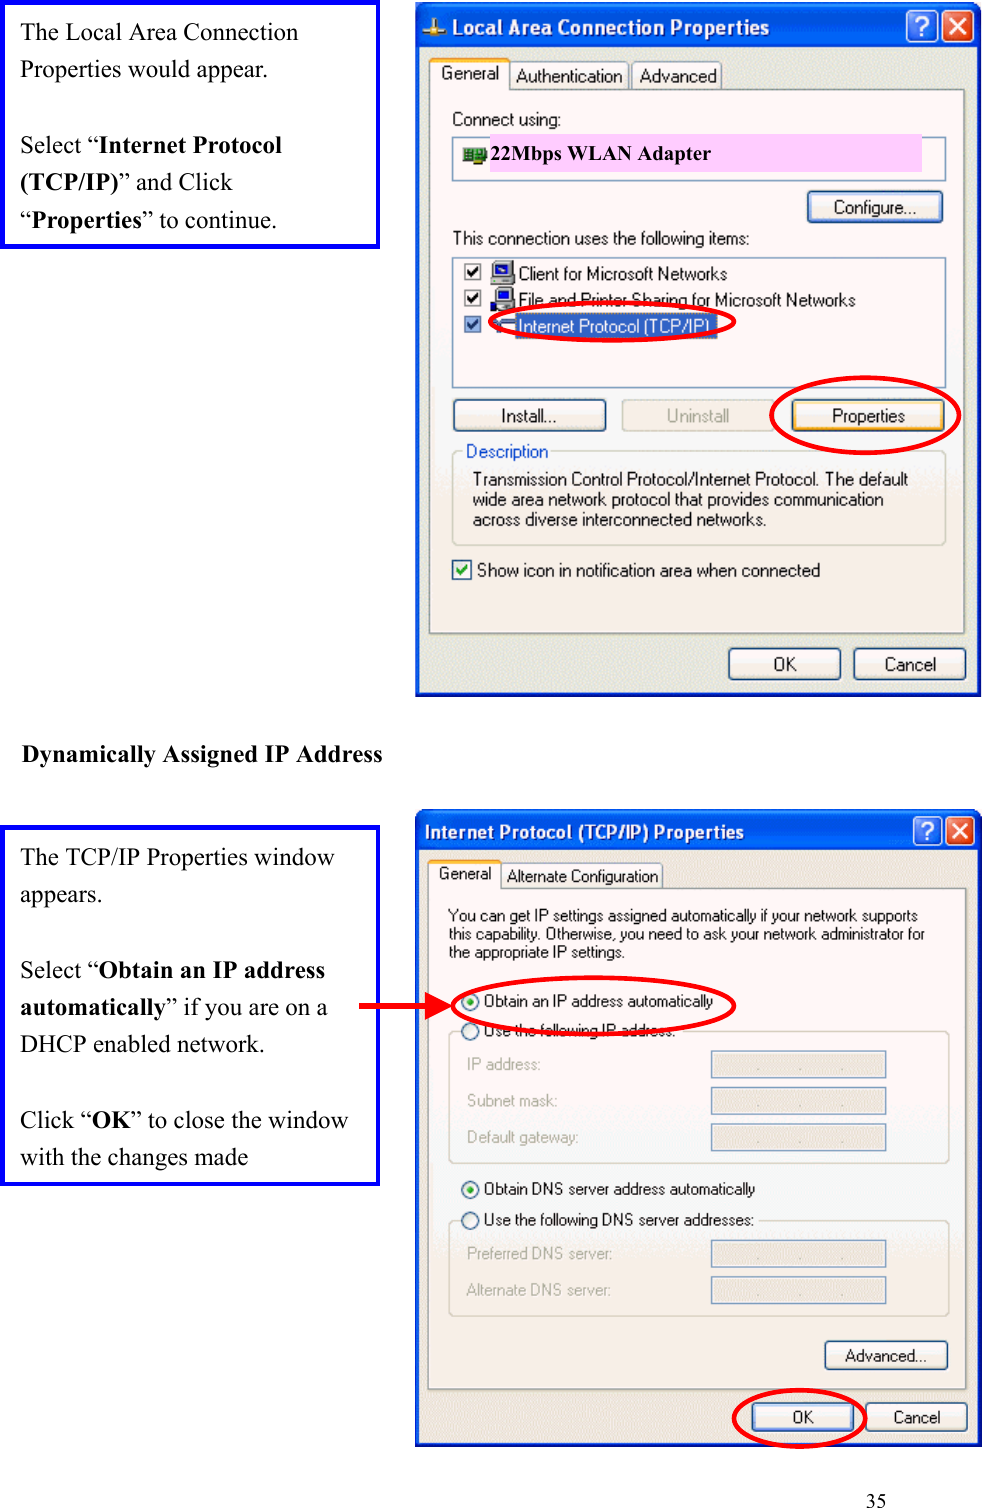 35Dynamically Assigned IP AddressThe TCP/IP Properties windowappears.Select “Obtain an IP addressautomatically” if you are on aDHCP enabled network.Click “OK” to close the windowwith the changes madeThe Local Area ConnectionProperties would appear.Select “Internet Protocol(TCP/IP)” and Click“Properties” to continue.22Mbps WLAN Adapter